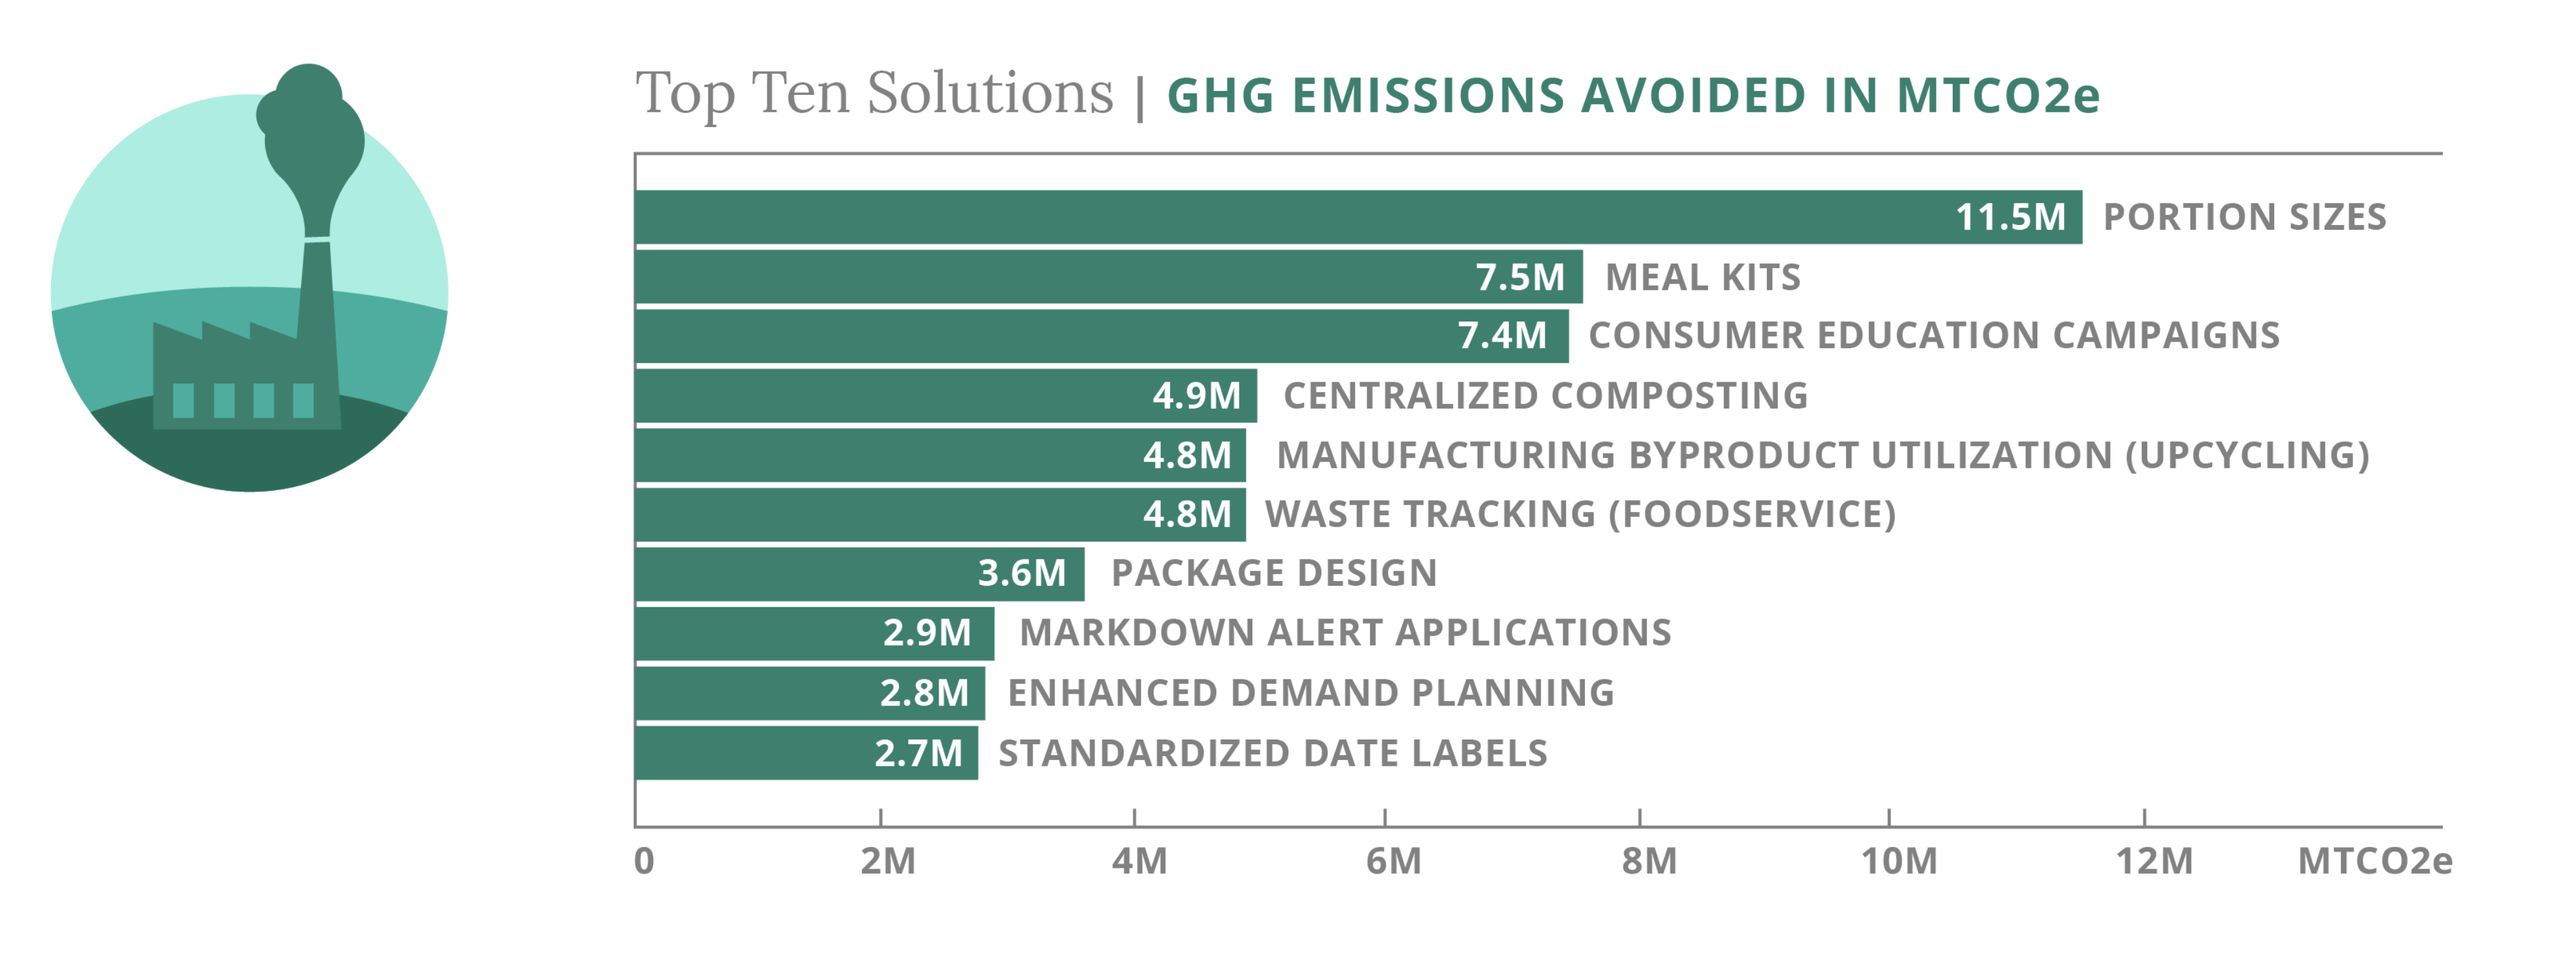 Top 10 Solutions to Mitigate GHG Emissions